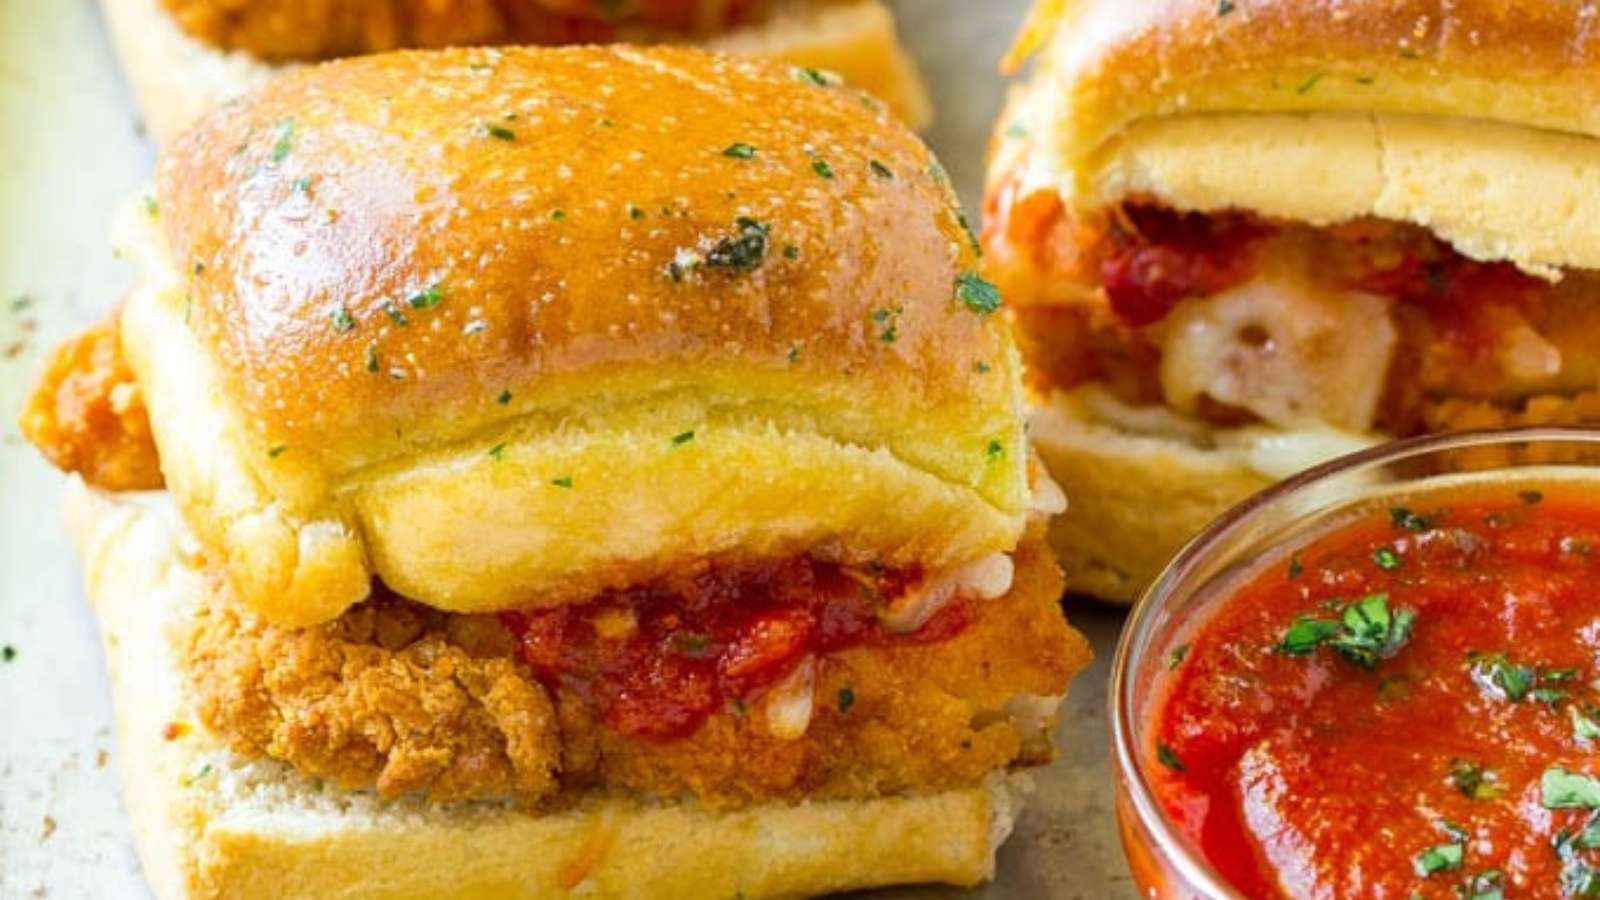 Chicken sliders with tomato sauce on a baking sheet.